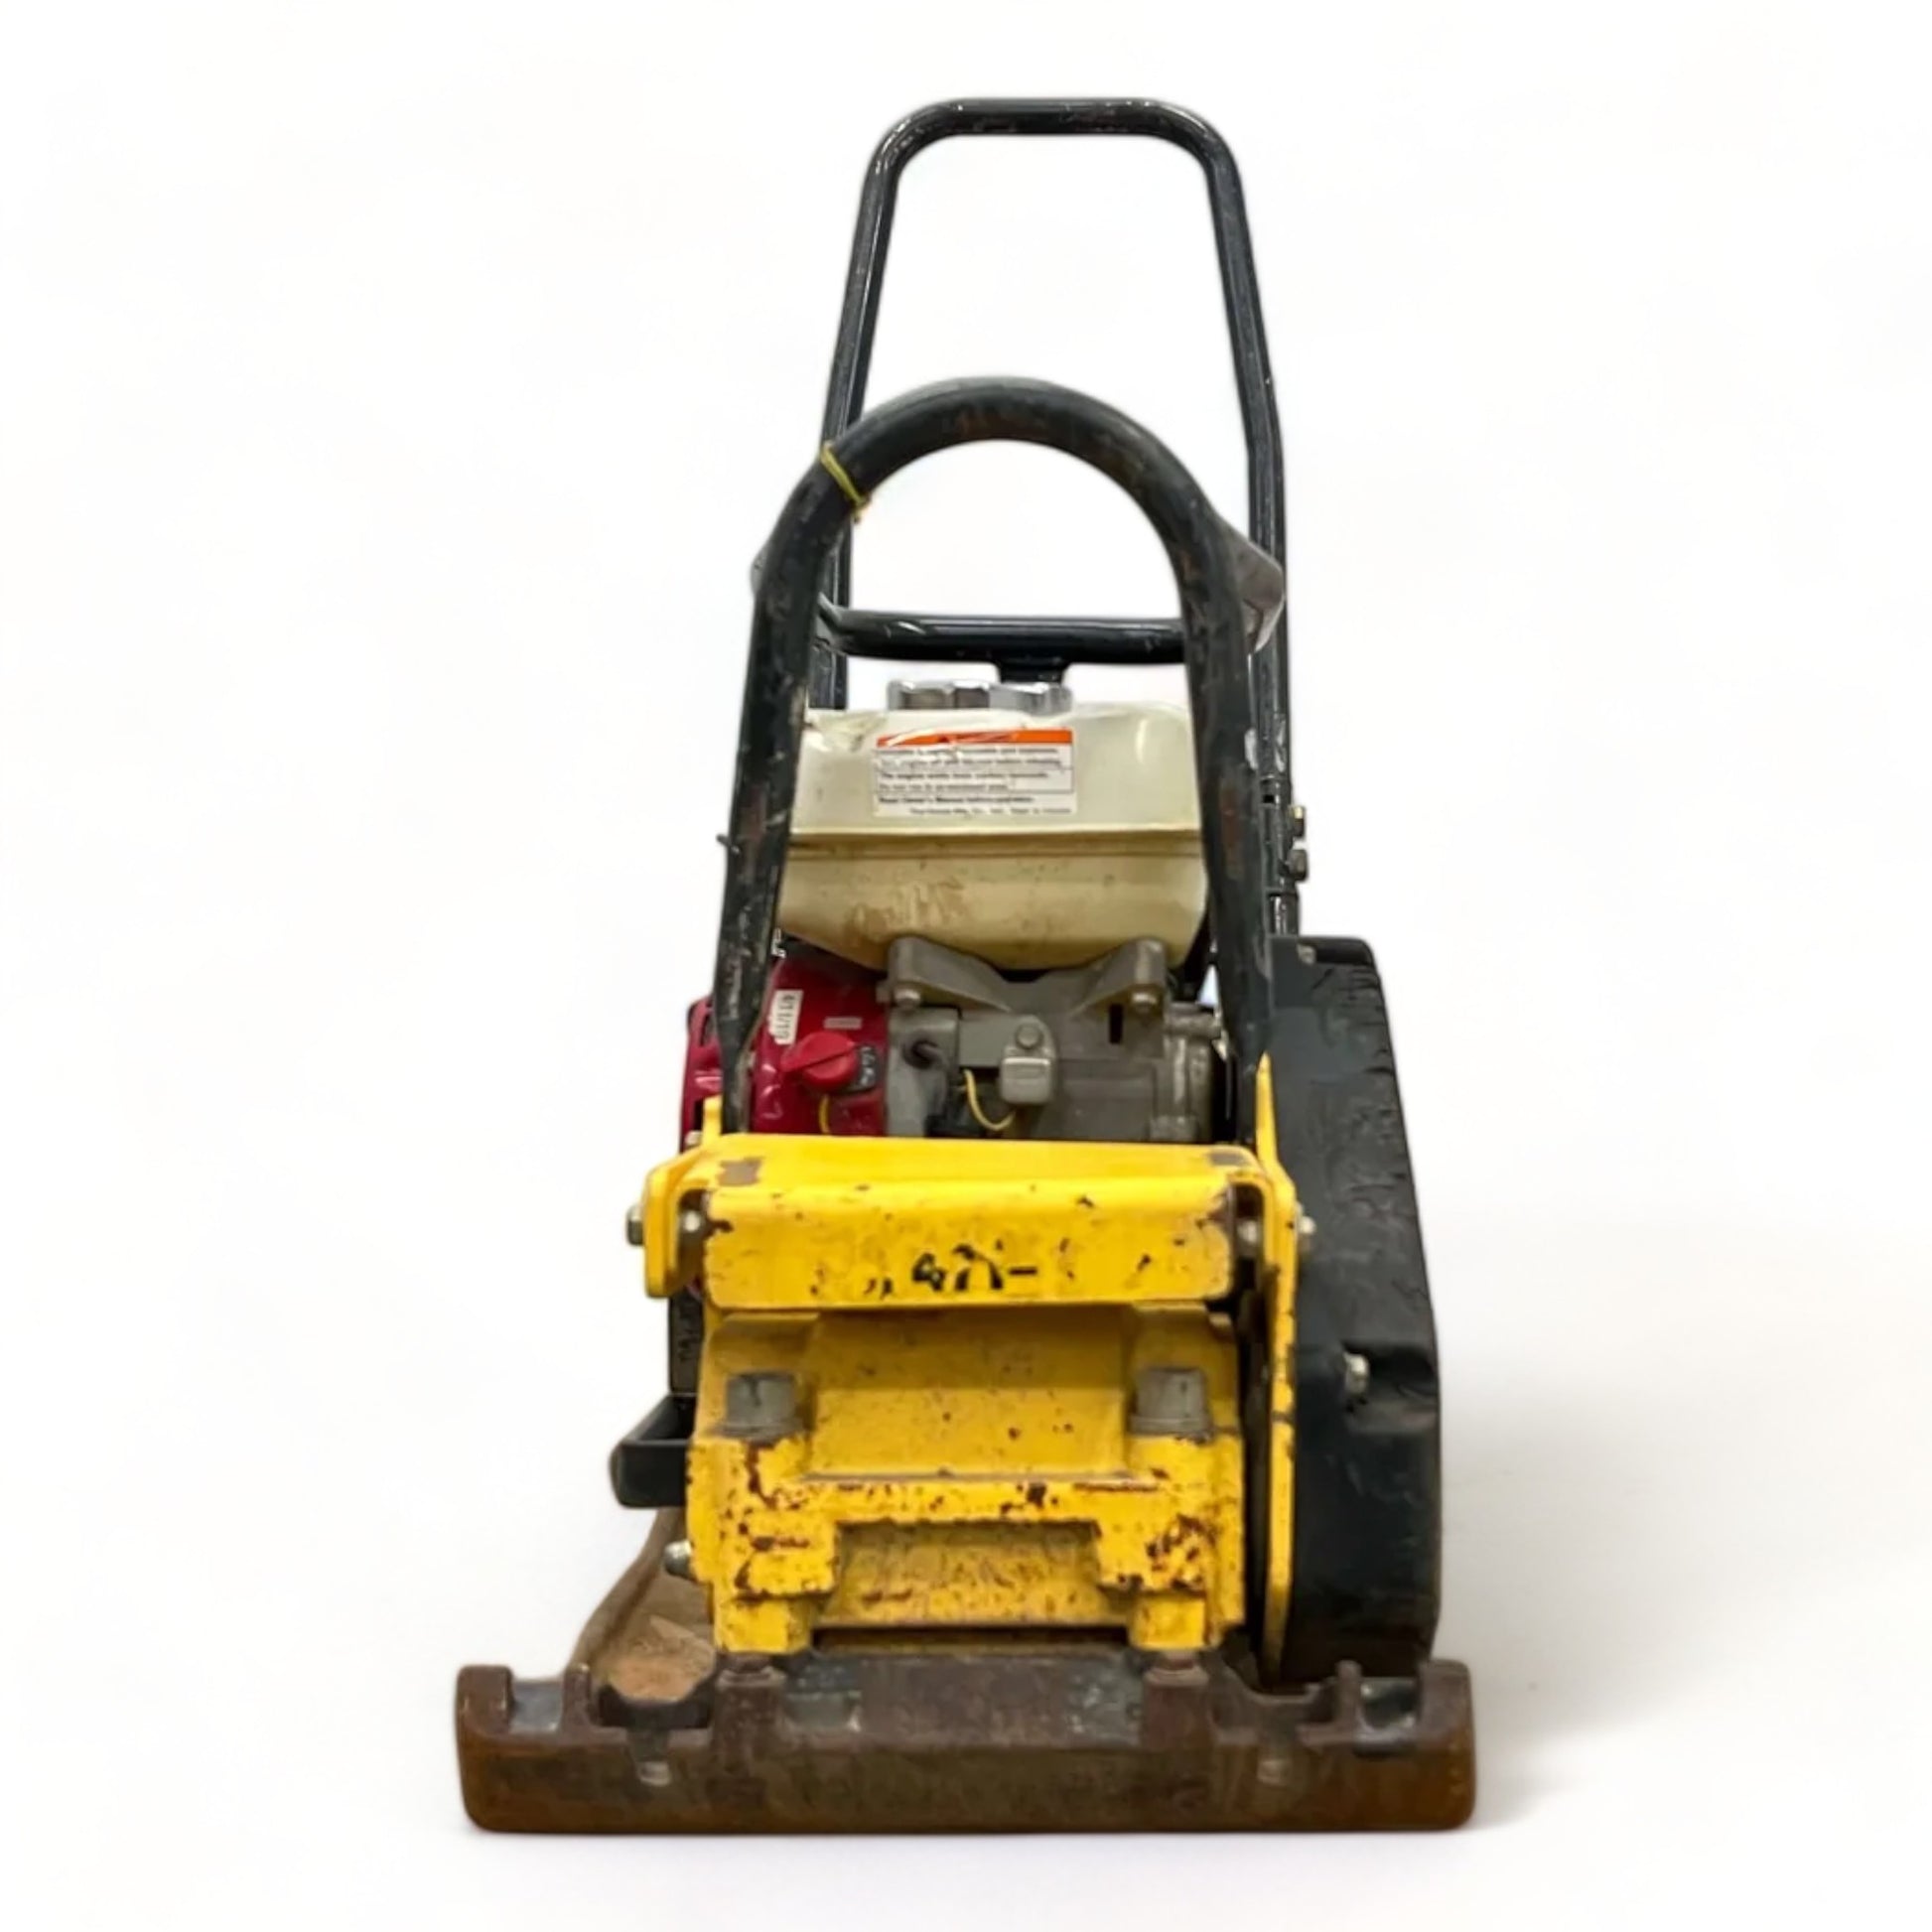 Bomag BVP10/36 14 Inch Plate Compactor